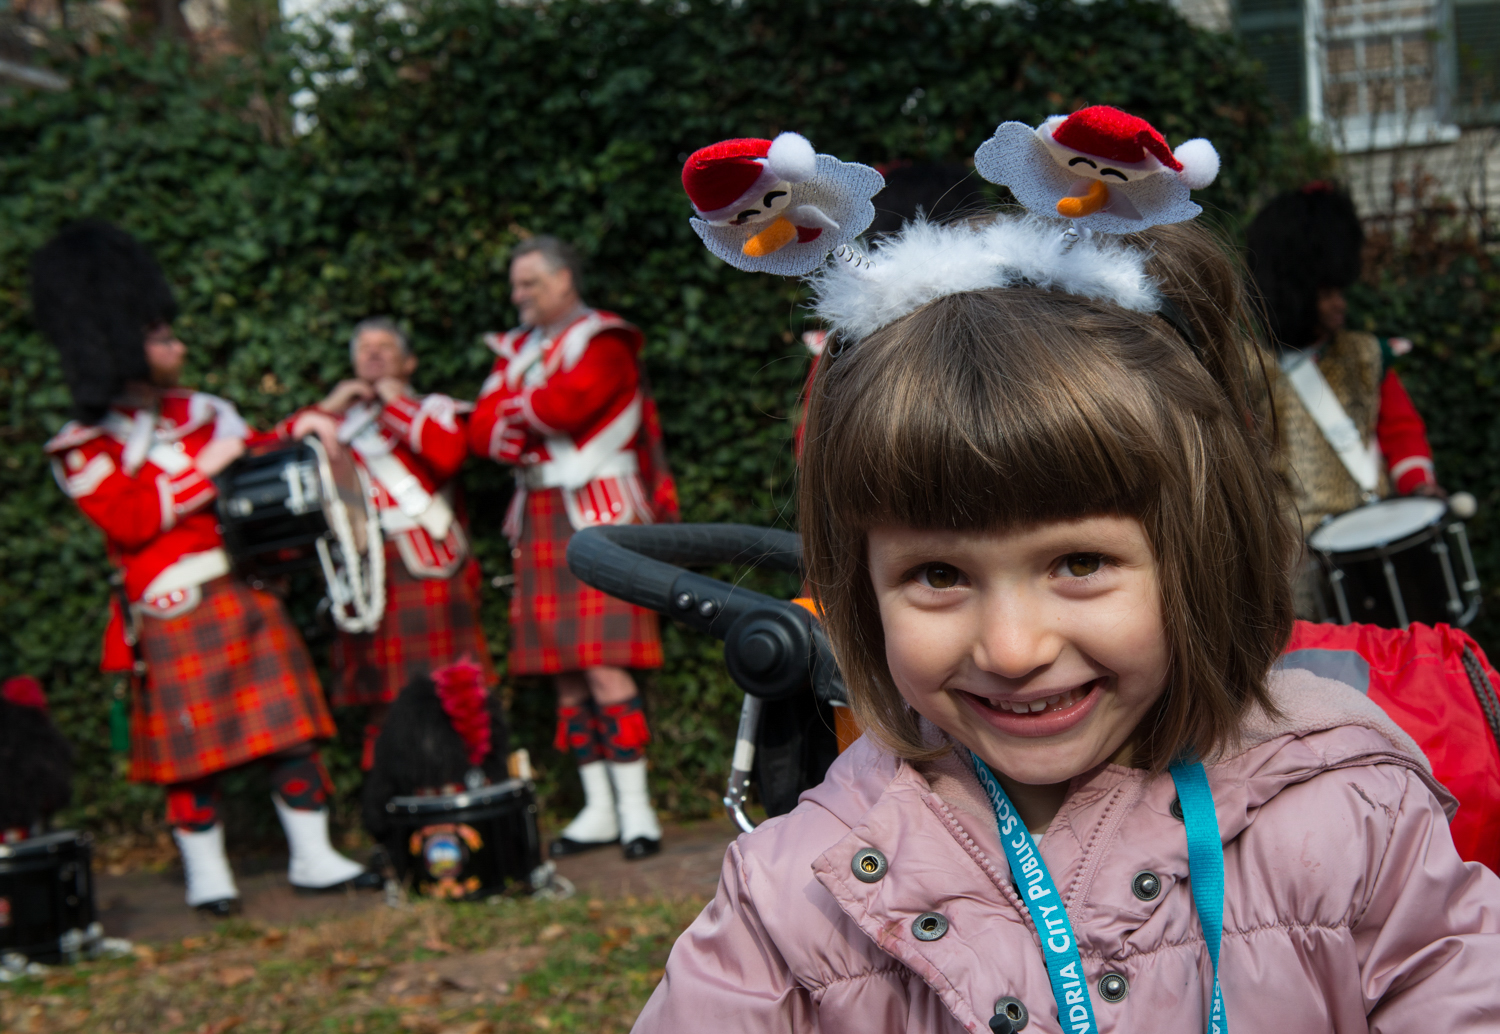 elementary school-age girl with Scottish bagpipe players in the background